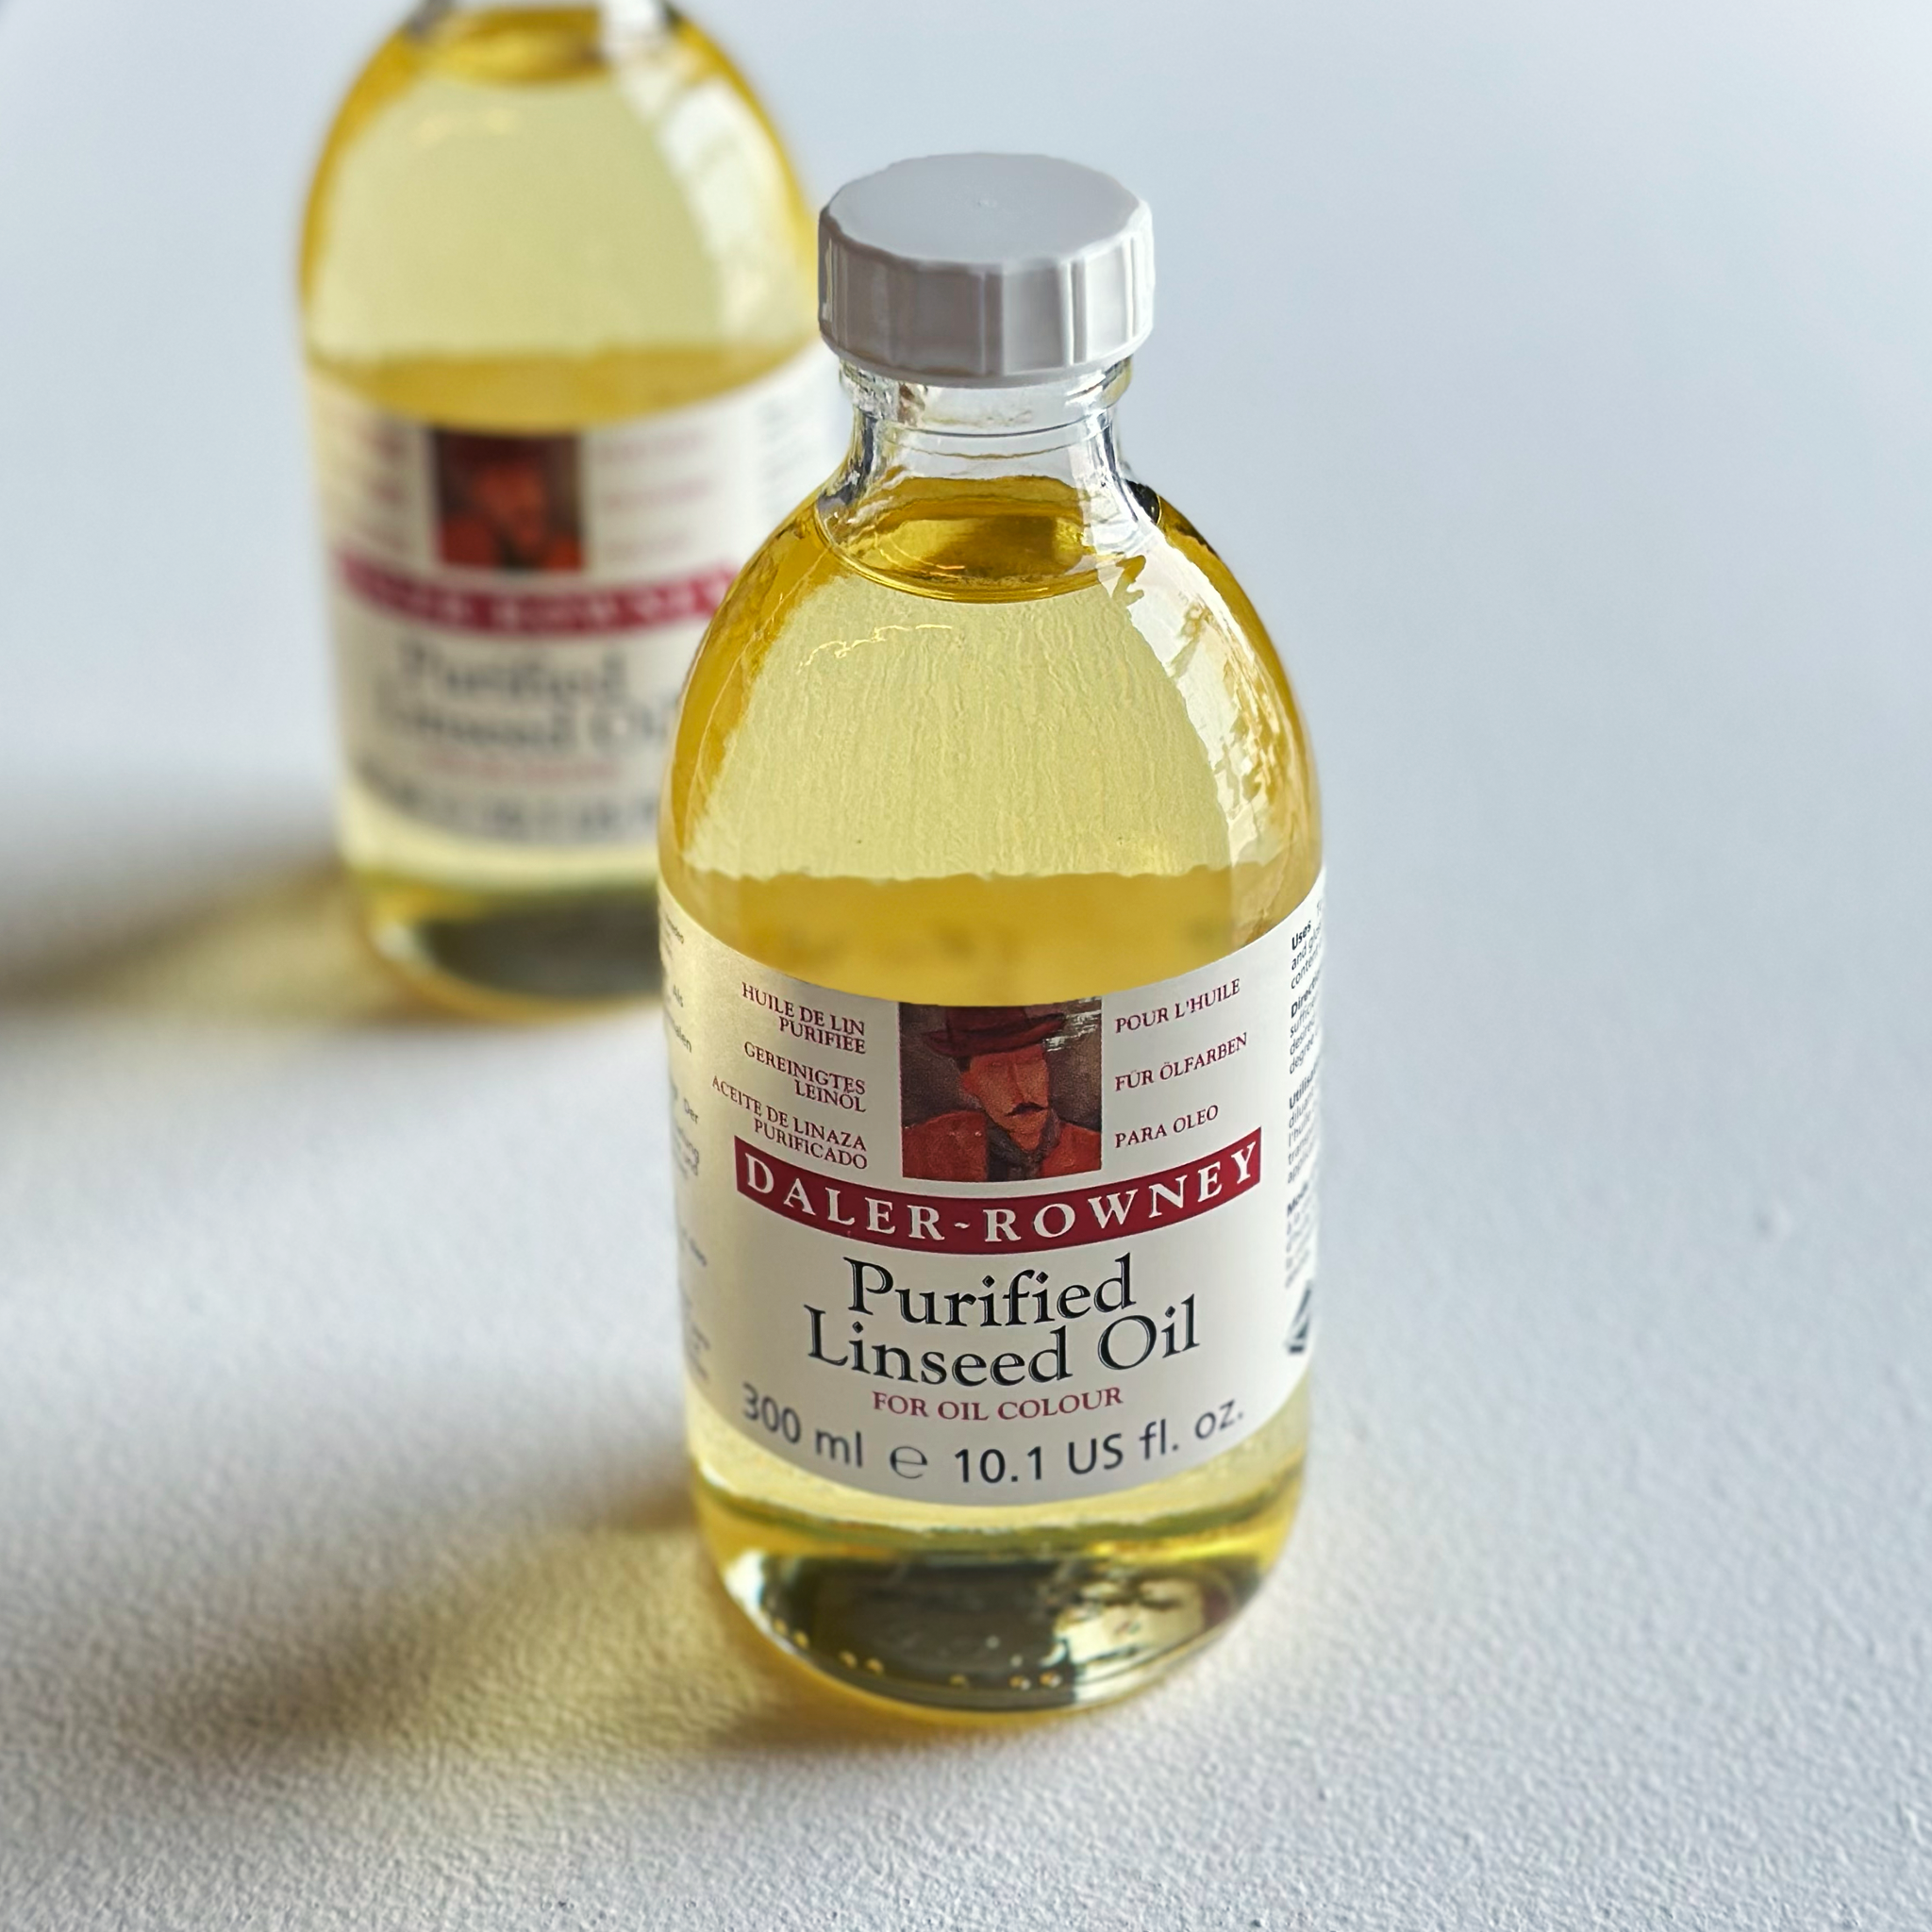 Daler-Rowney Purified Linseed Oil | 300 mL